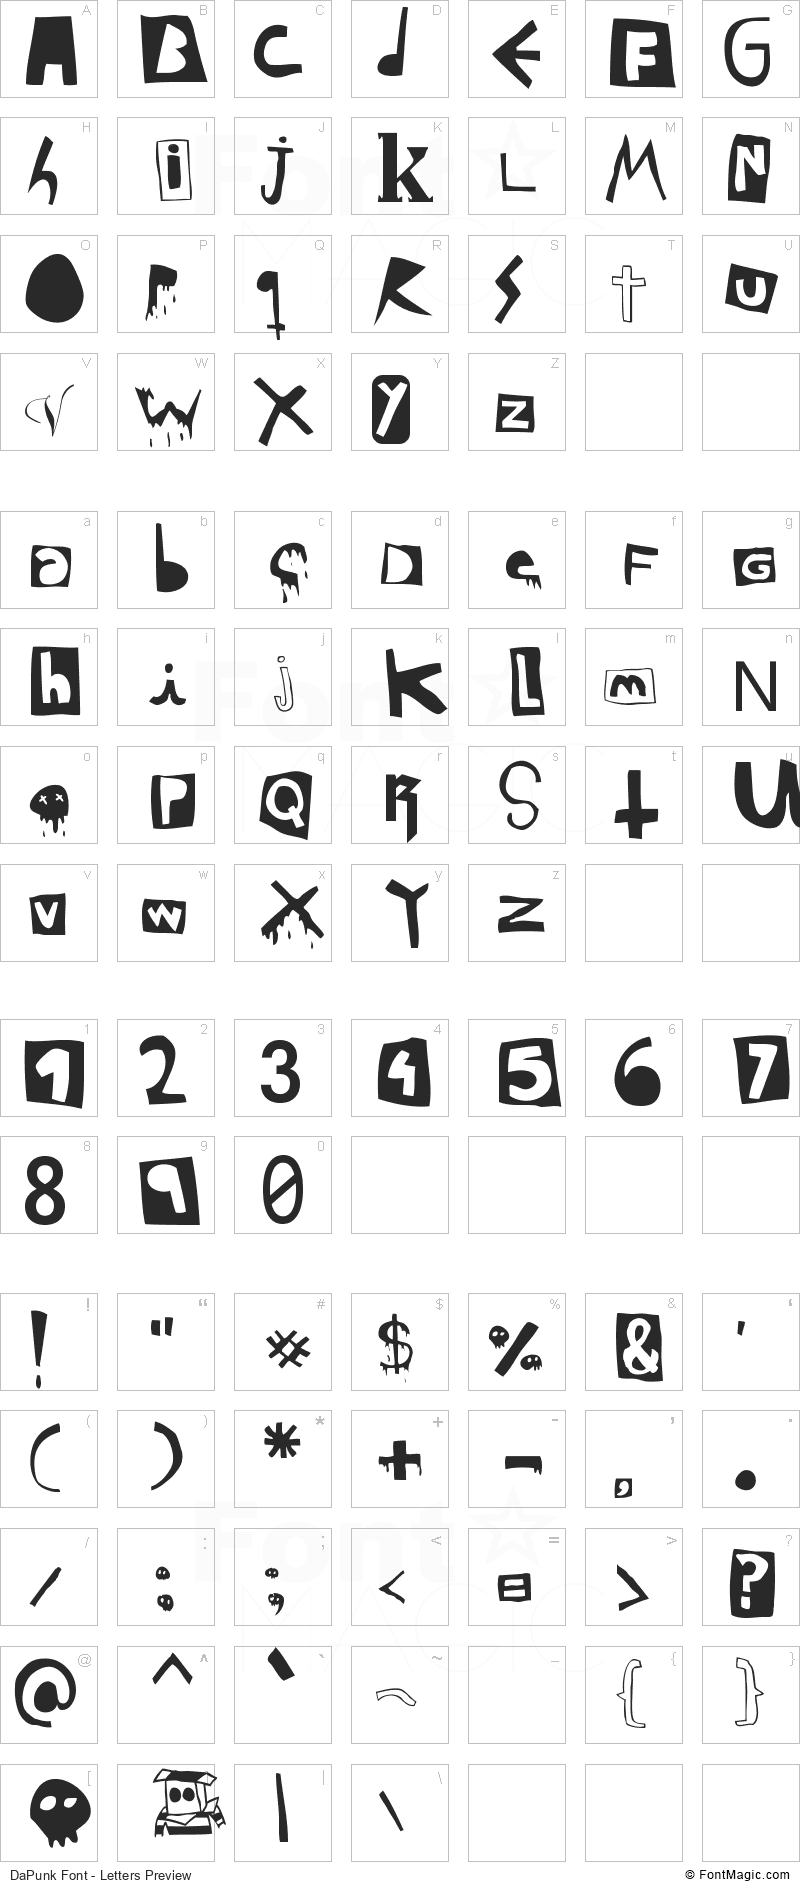 DaPunk Font - All Latters Preview Chart